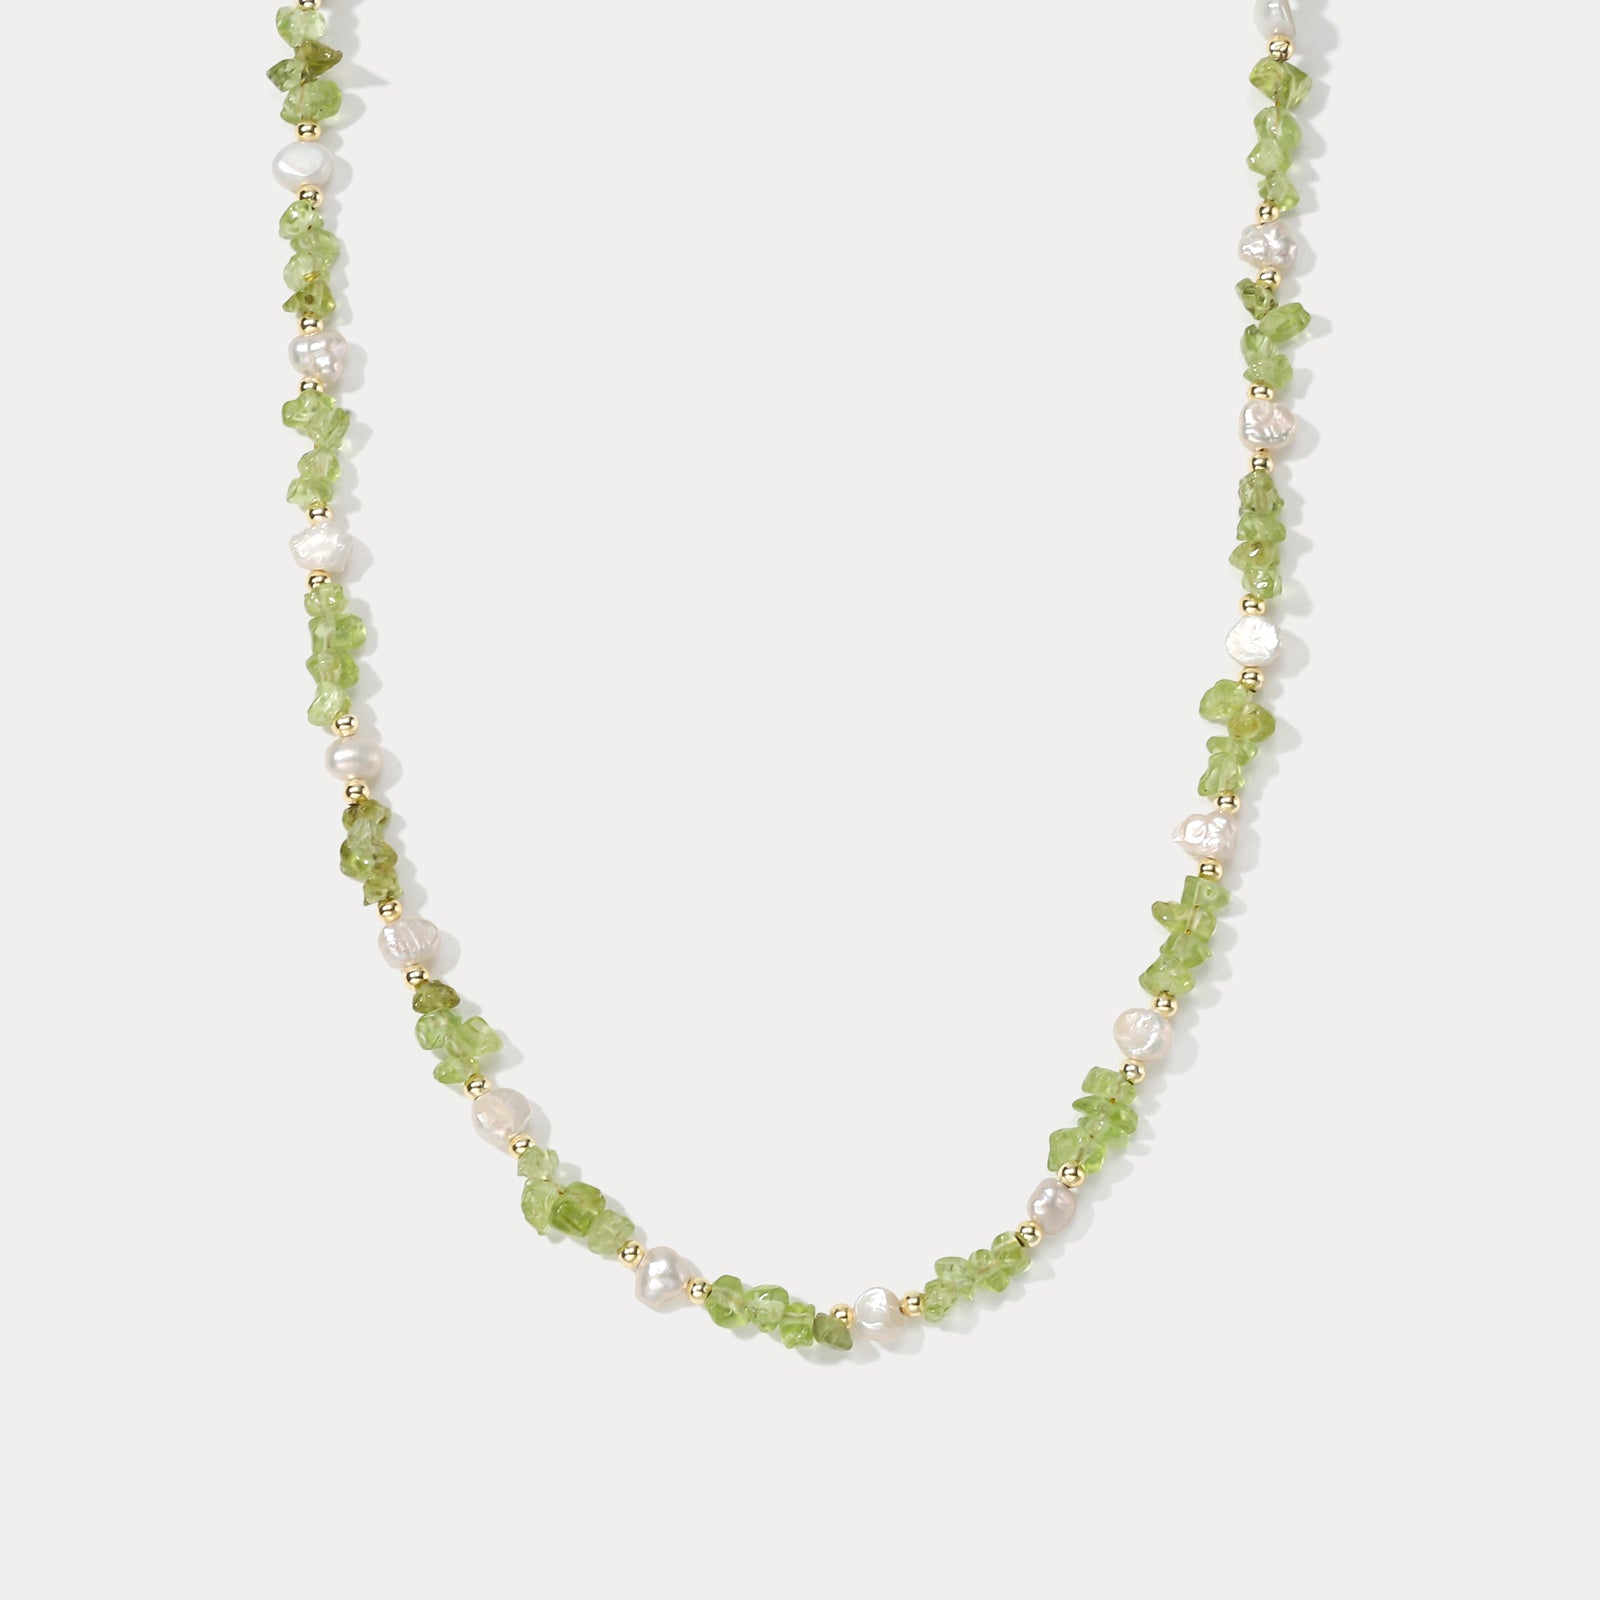 Pastel Green Chip Stone Beaded Necklace